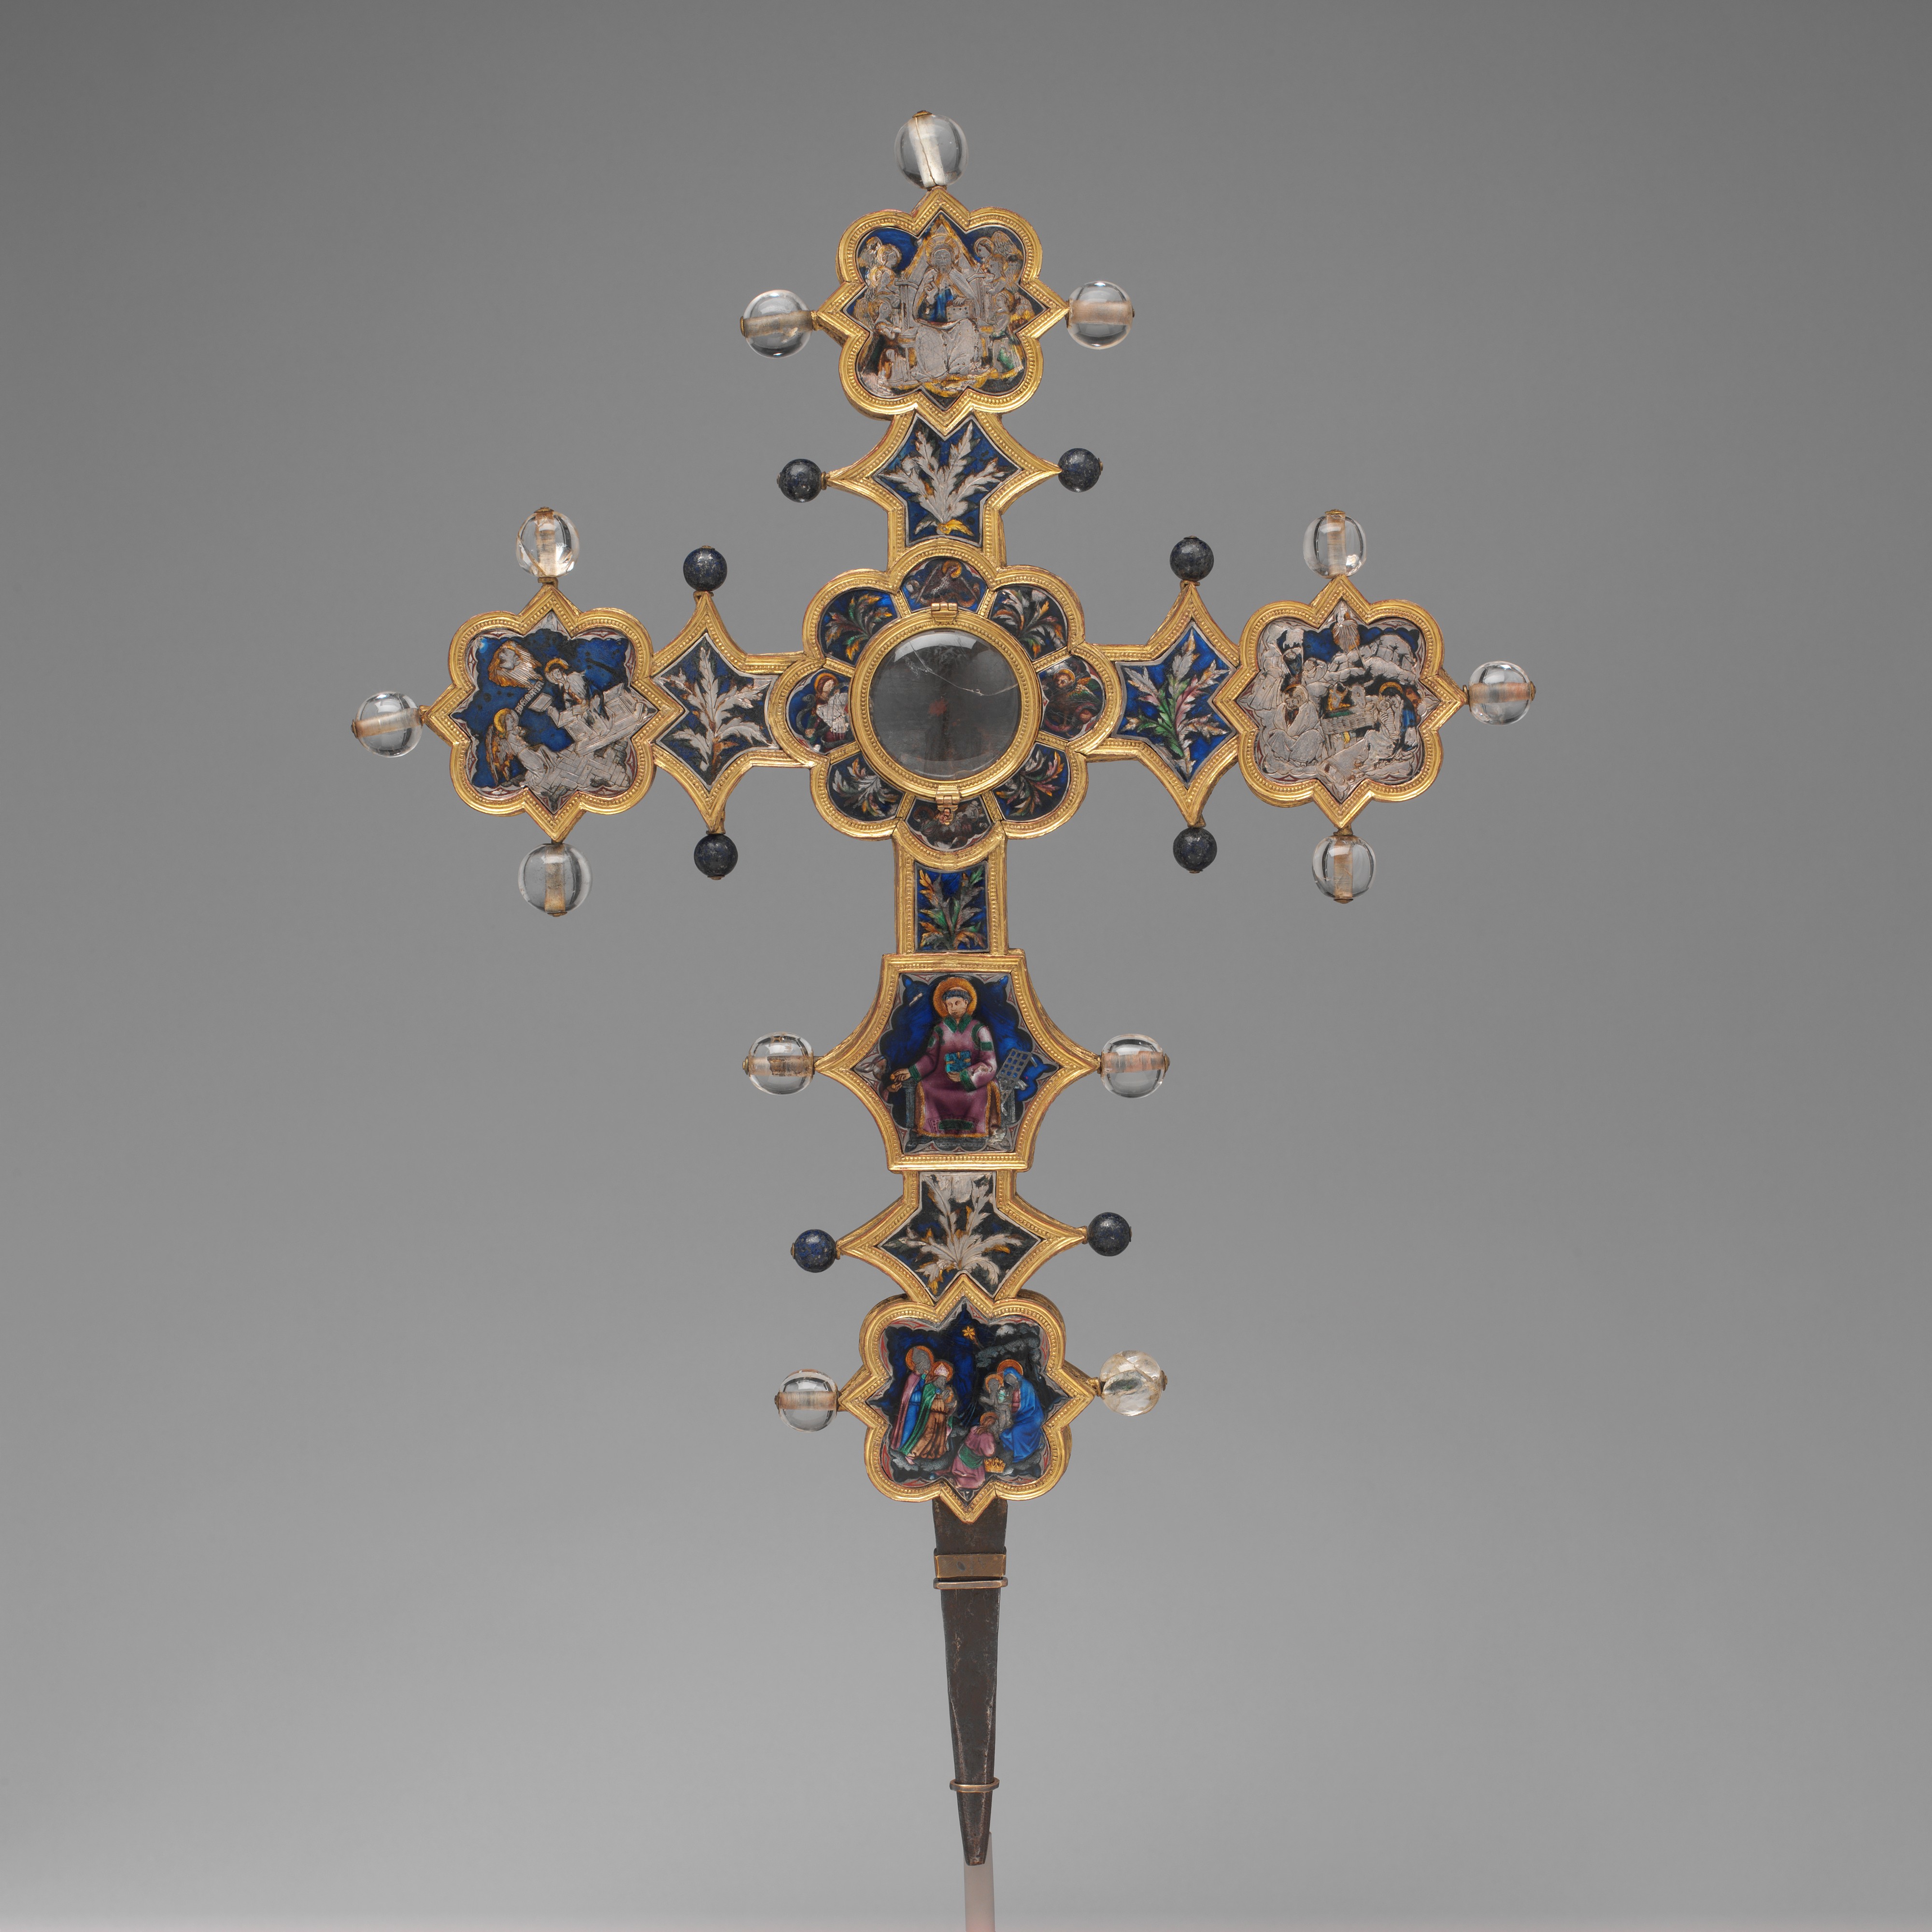 Reliquary Cross (The Cloisters) - Wikipedia